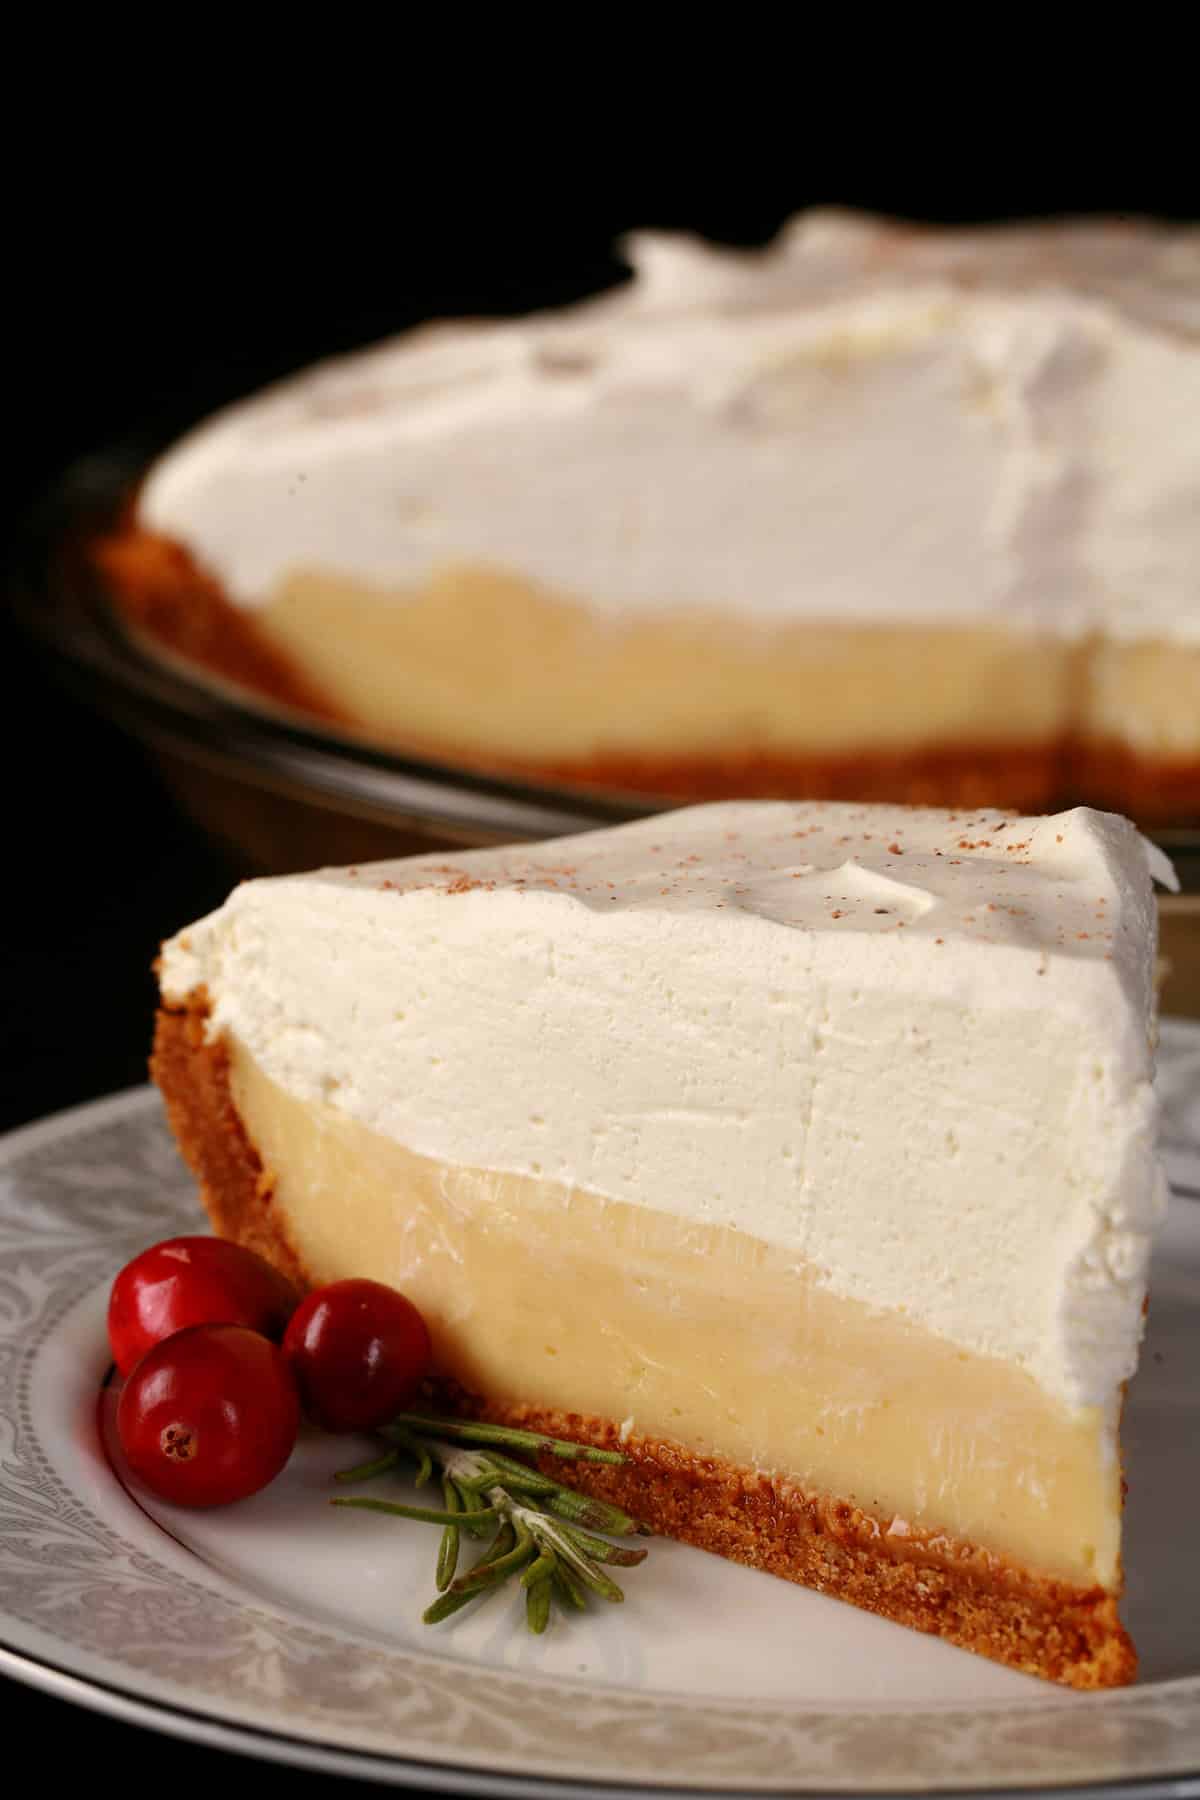 A slice of eggnog cream pie, with the rest of the pie behind it.